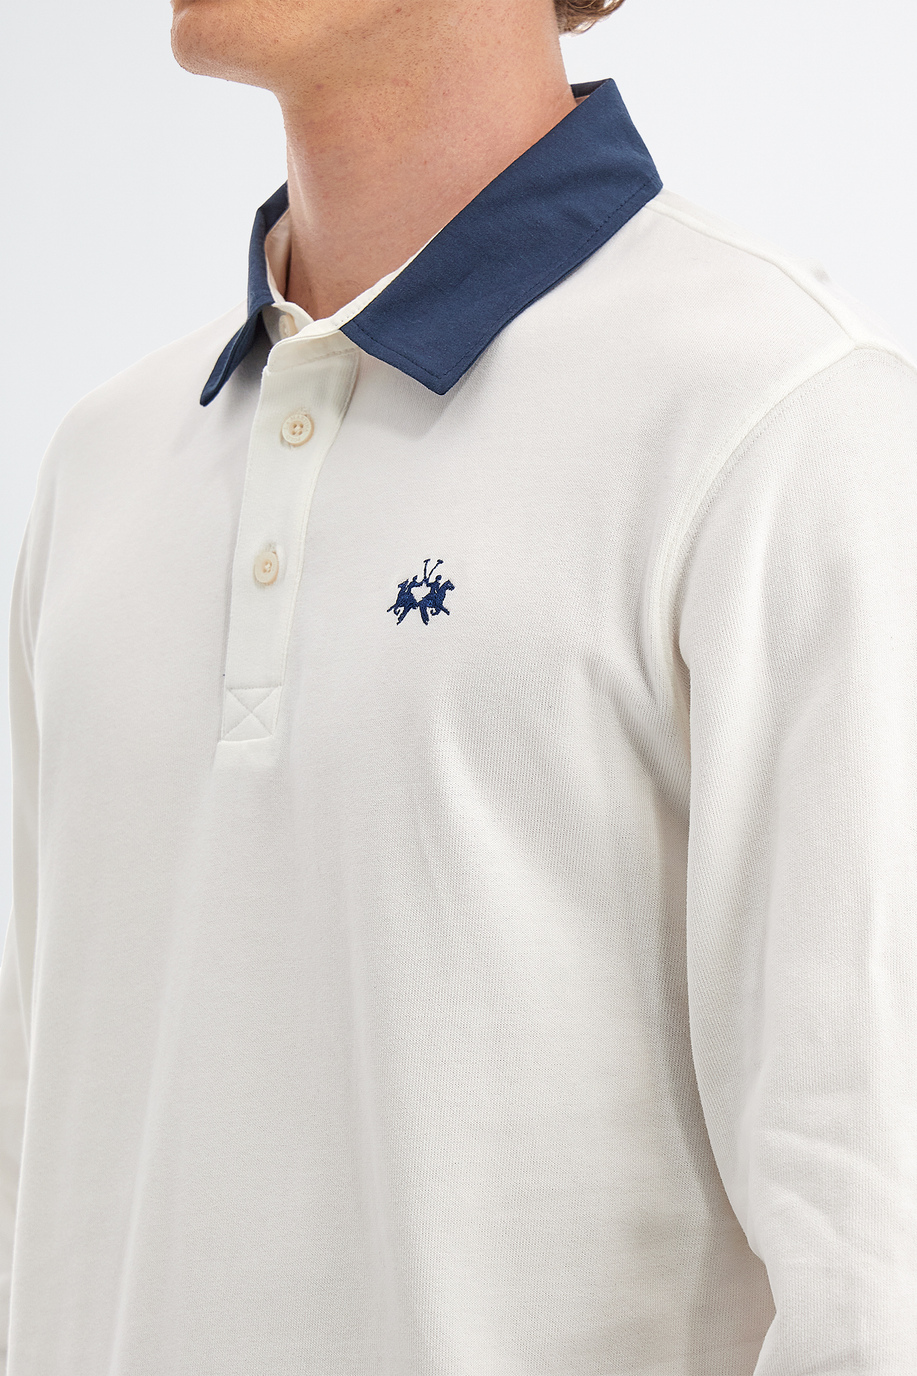 Men’s polo shirt with long sleeves in regular fit jersey cotton - Gifts under €150 for him | La Martina - Official Online Shop